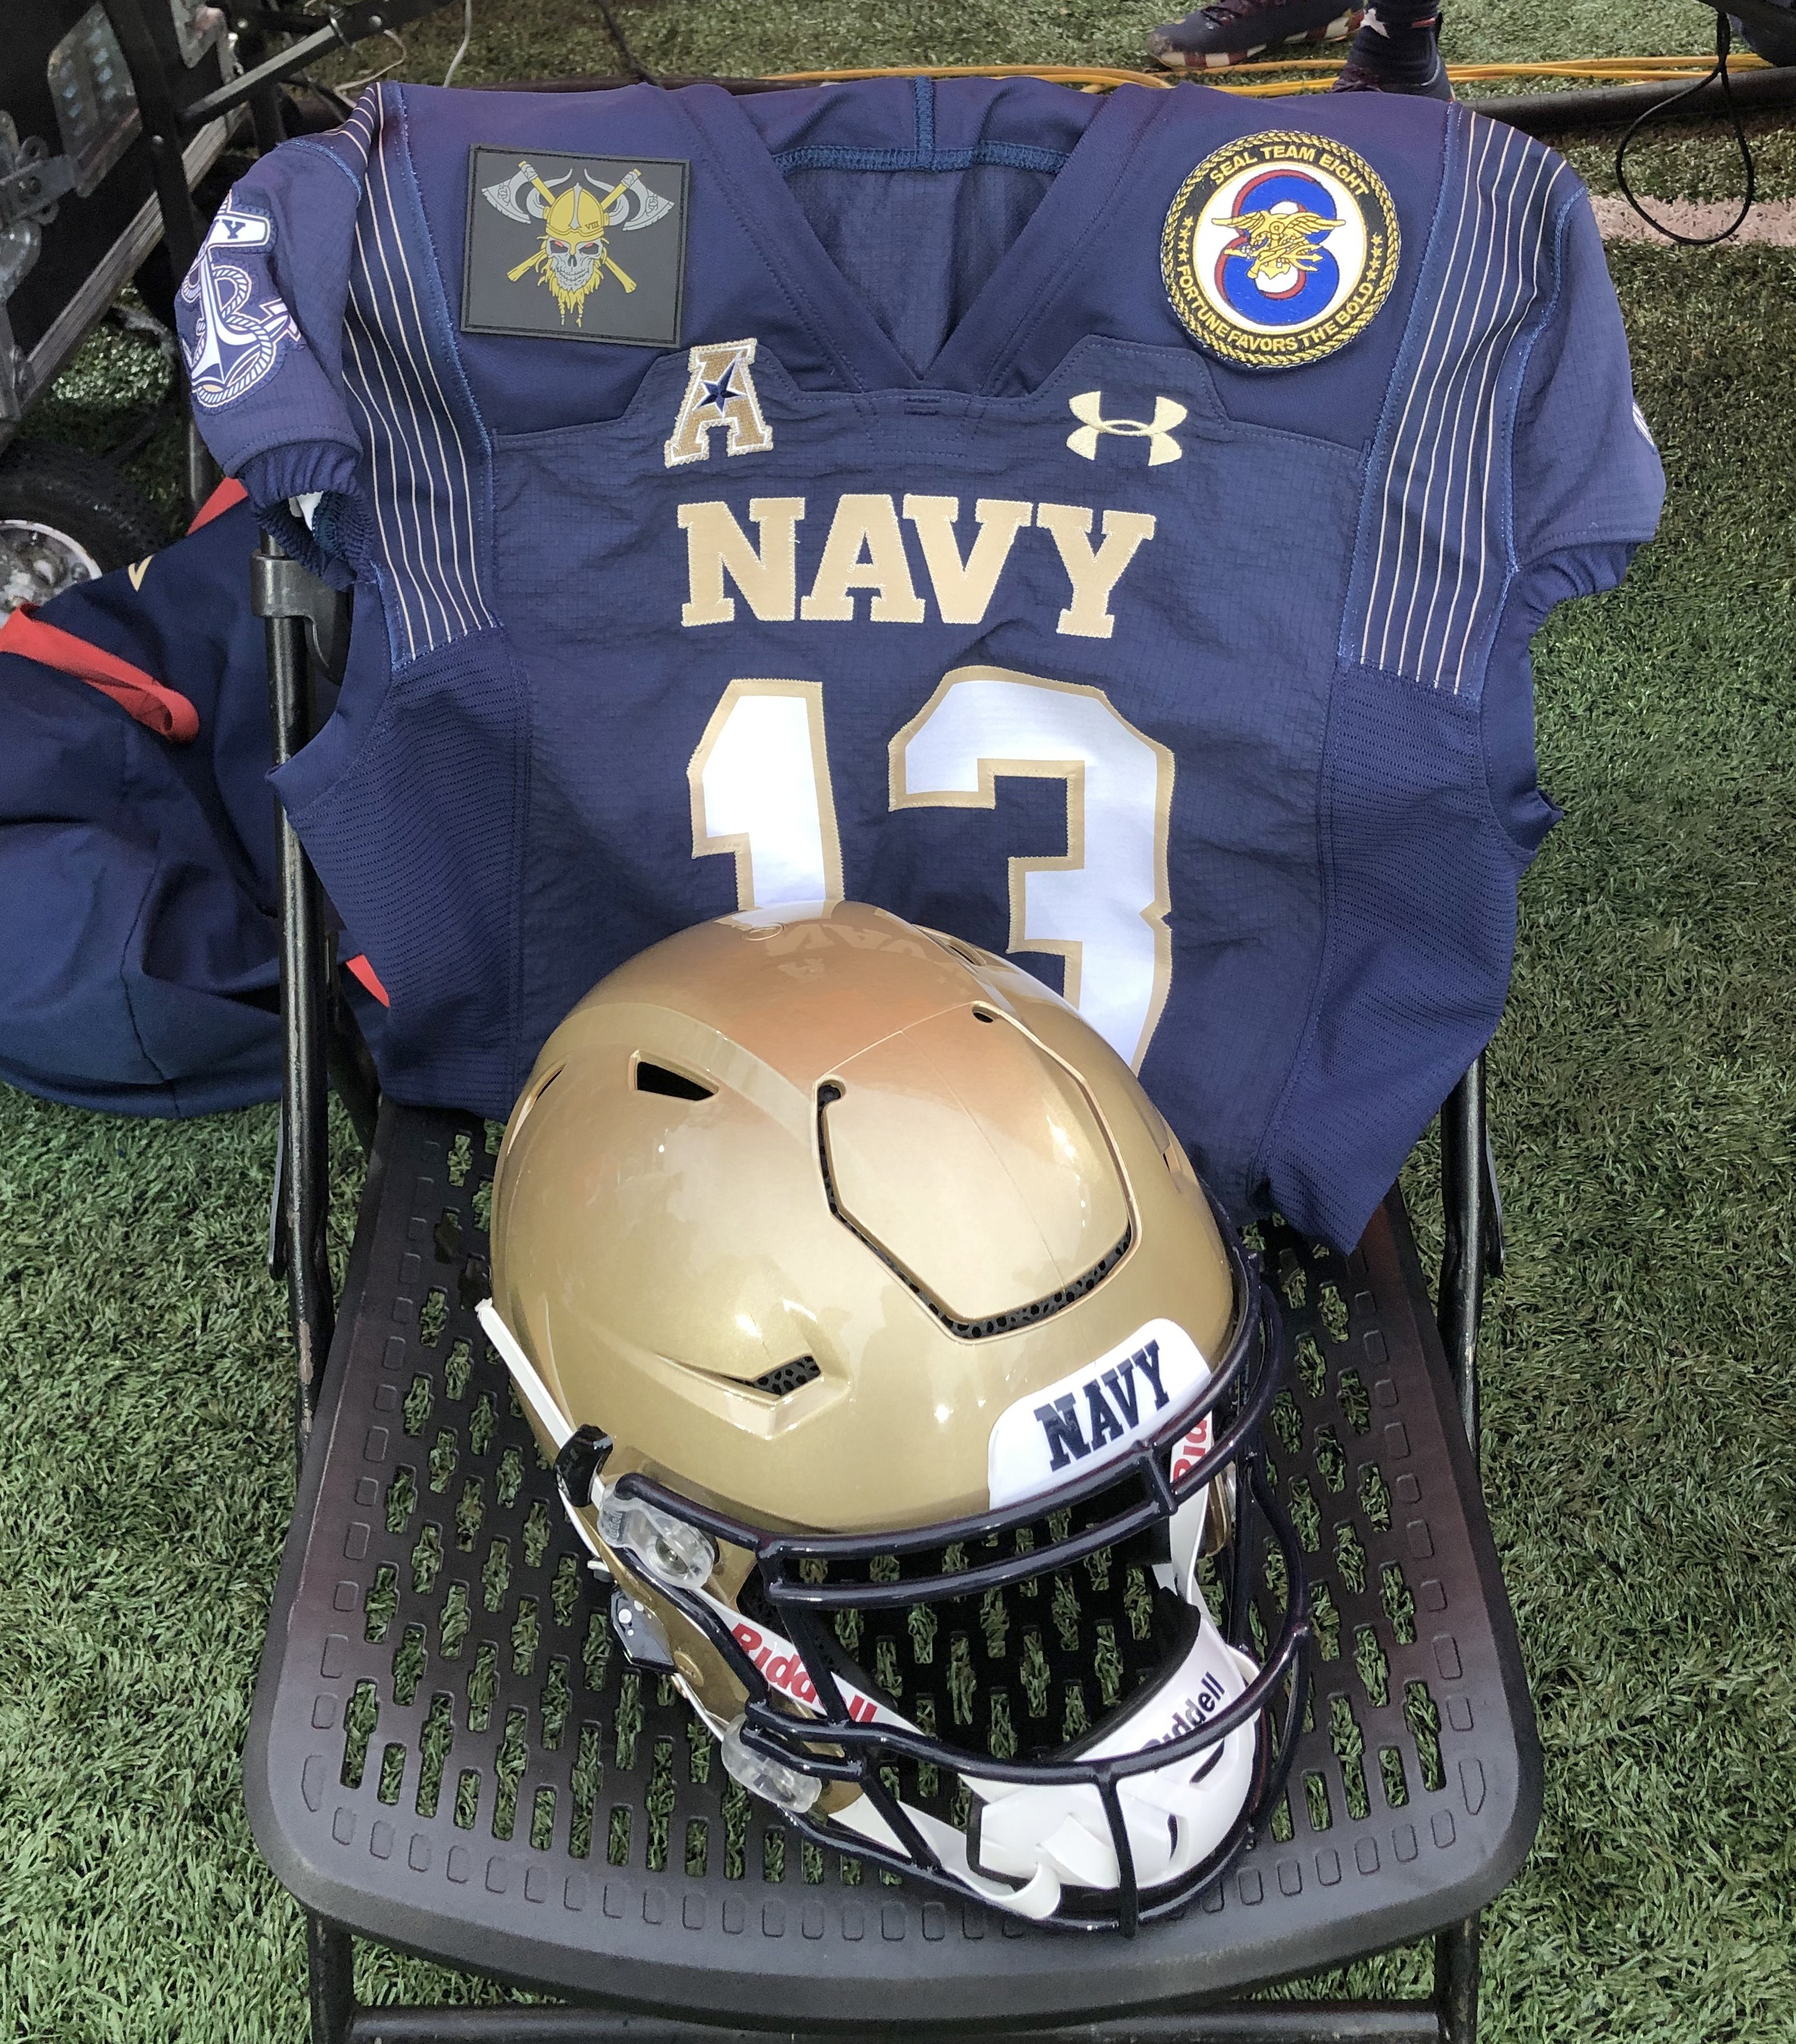 US Naval Academy unveils NASA-inspired uniforms for Army-Navy game